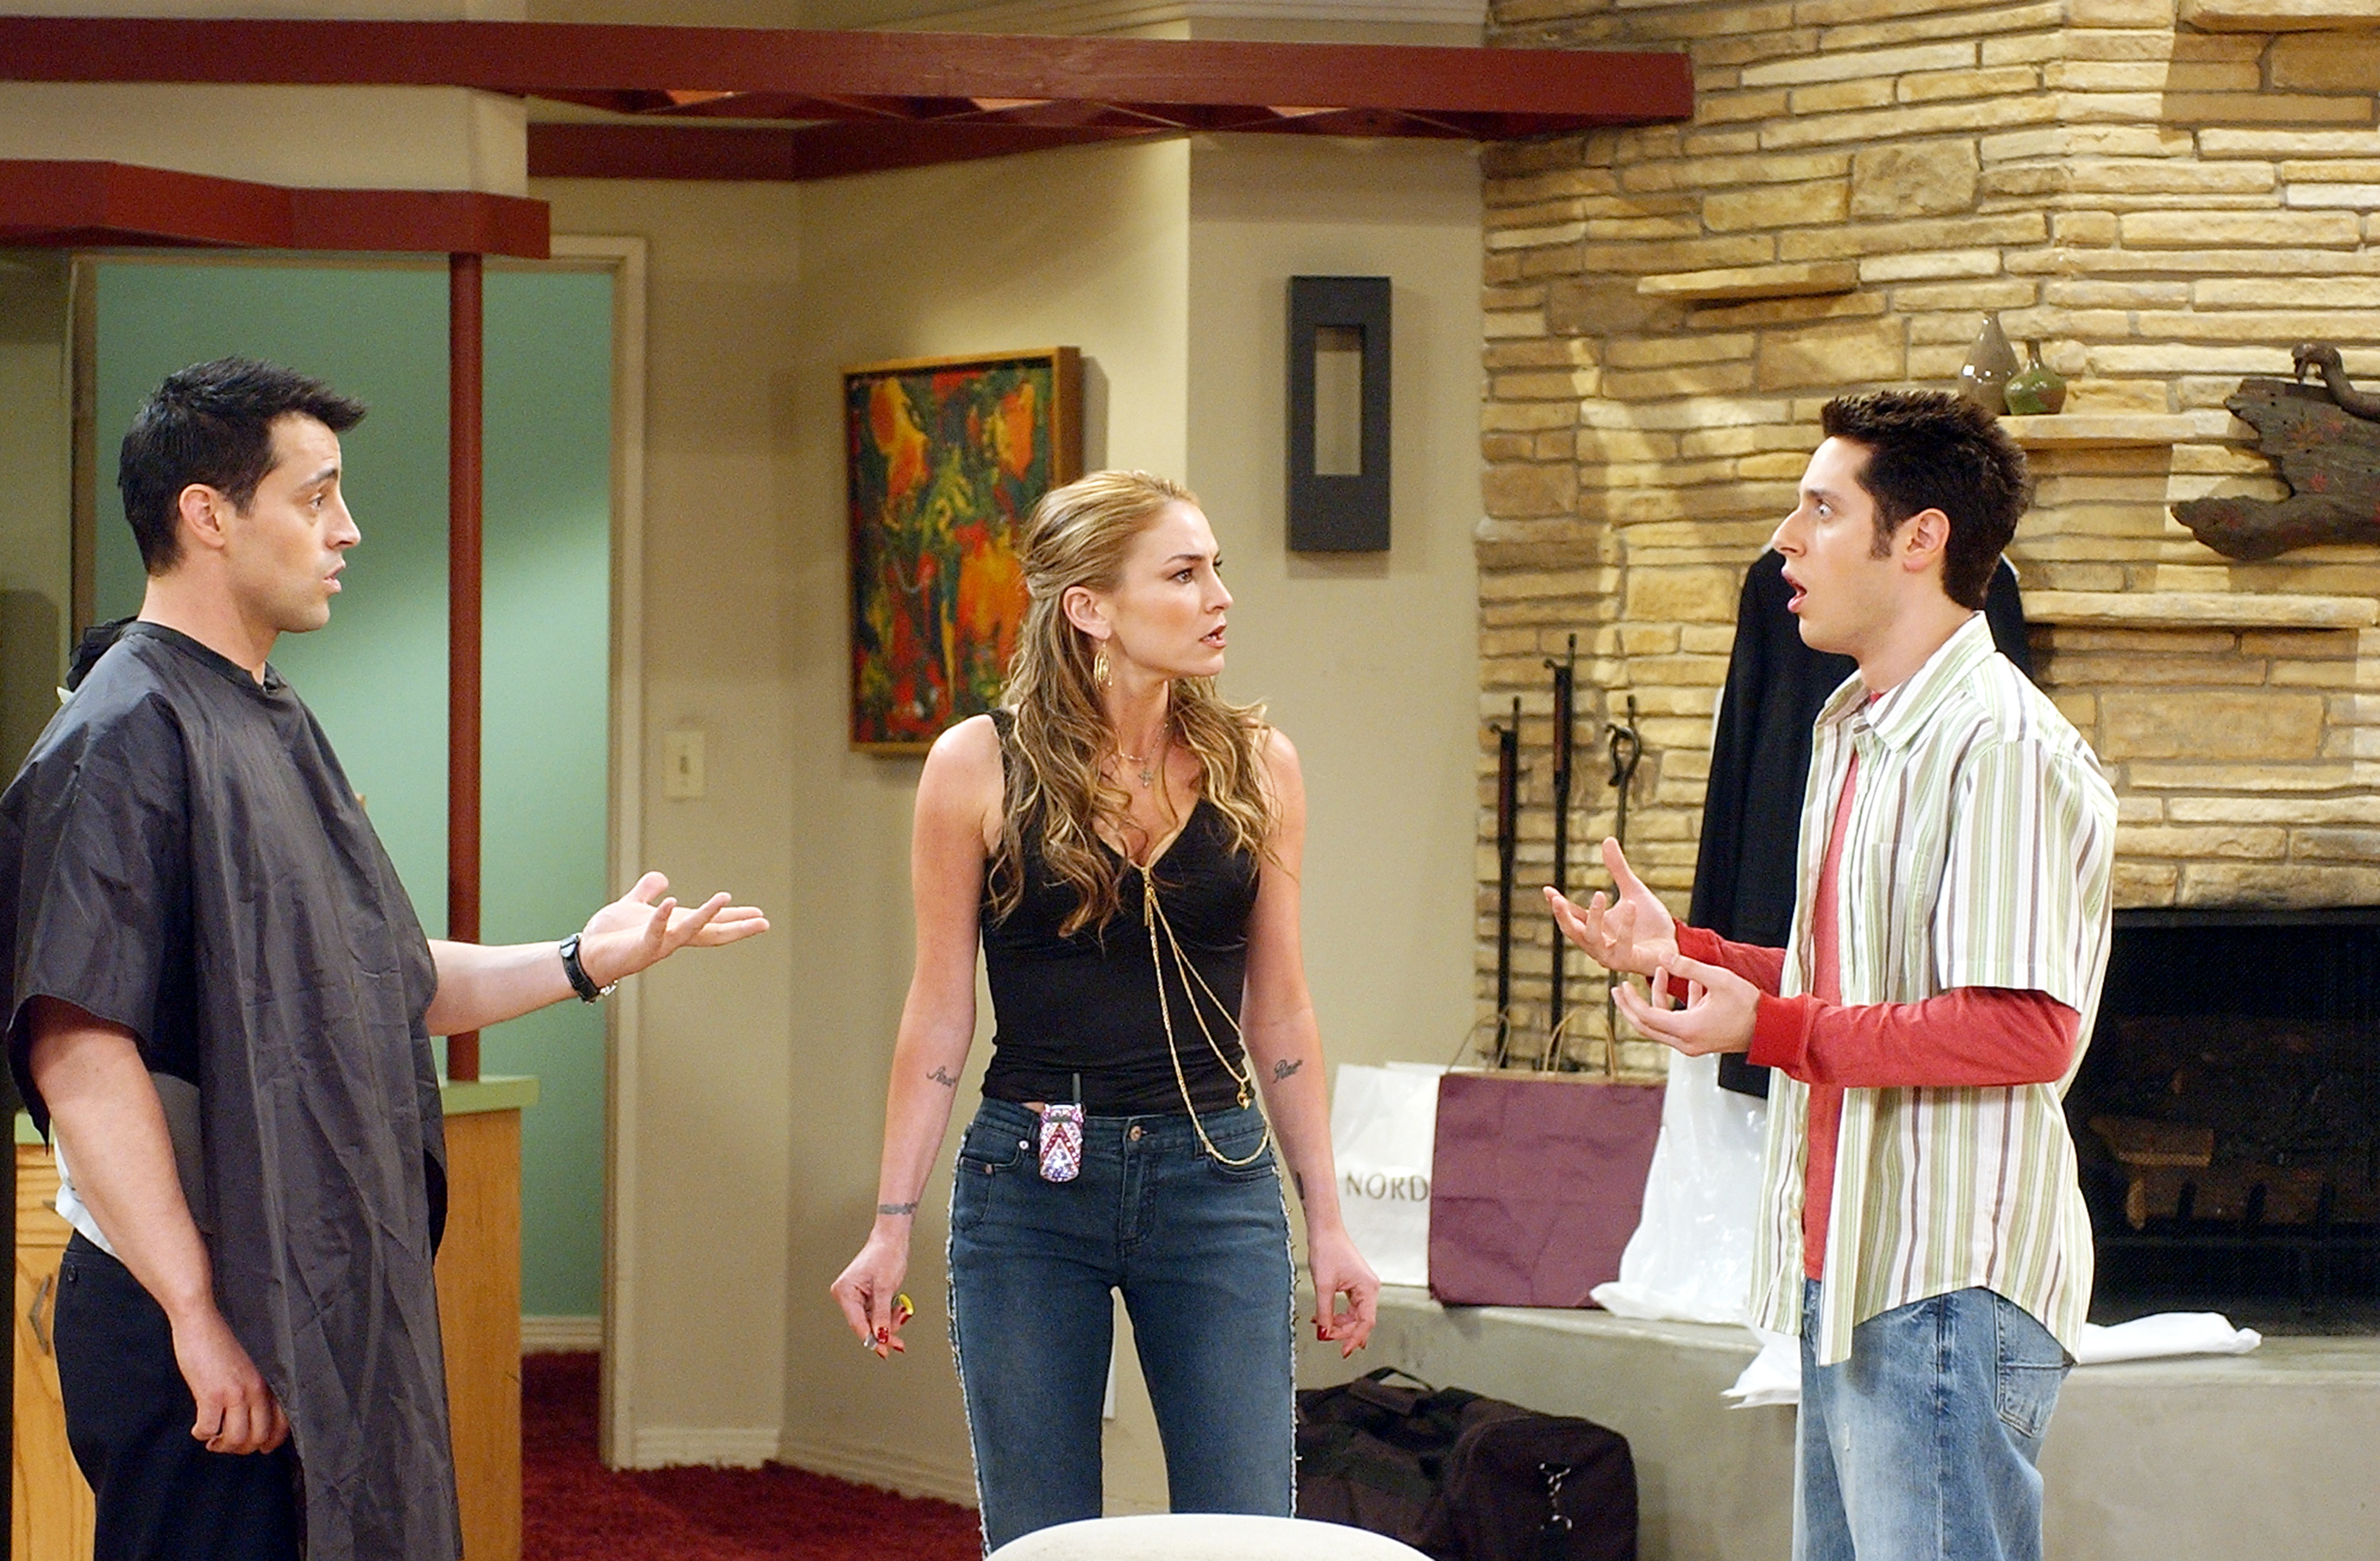 Three people in a sitcom scene with two men gesturing in conversation and a woman in the center looking perplexed